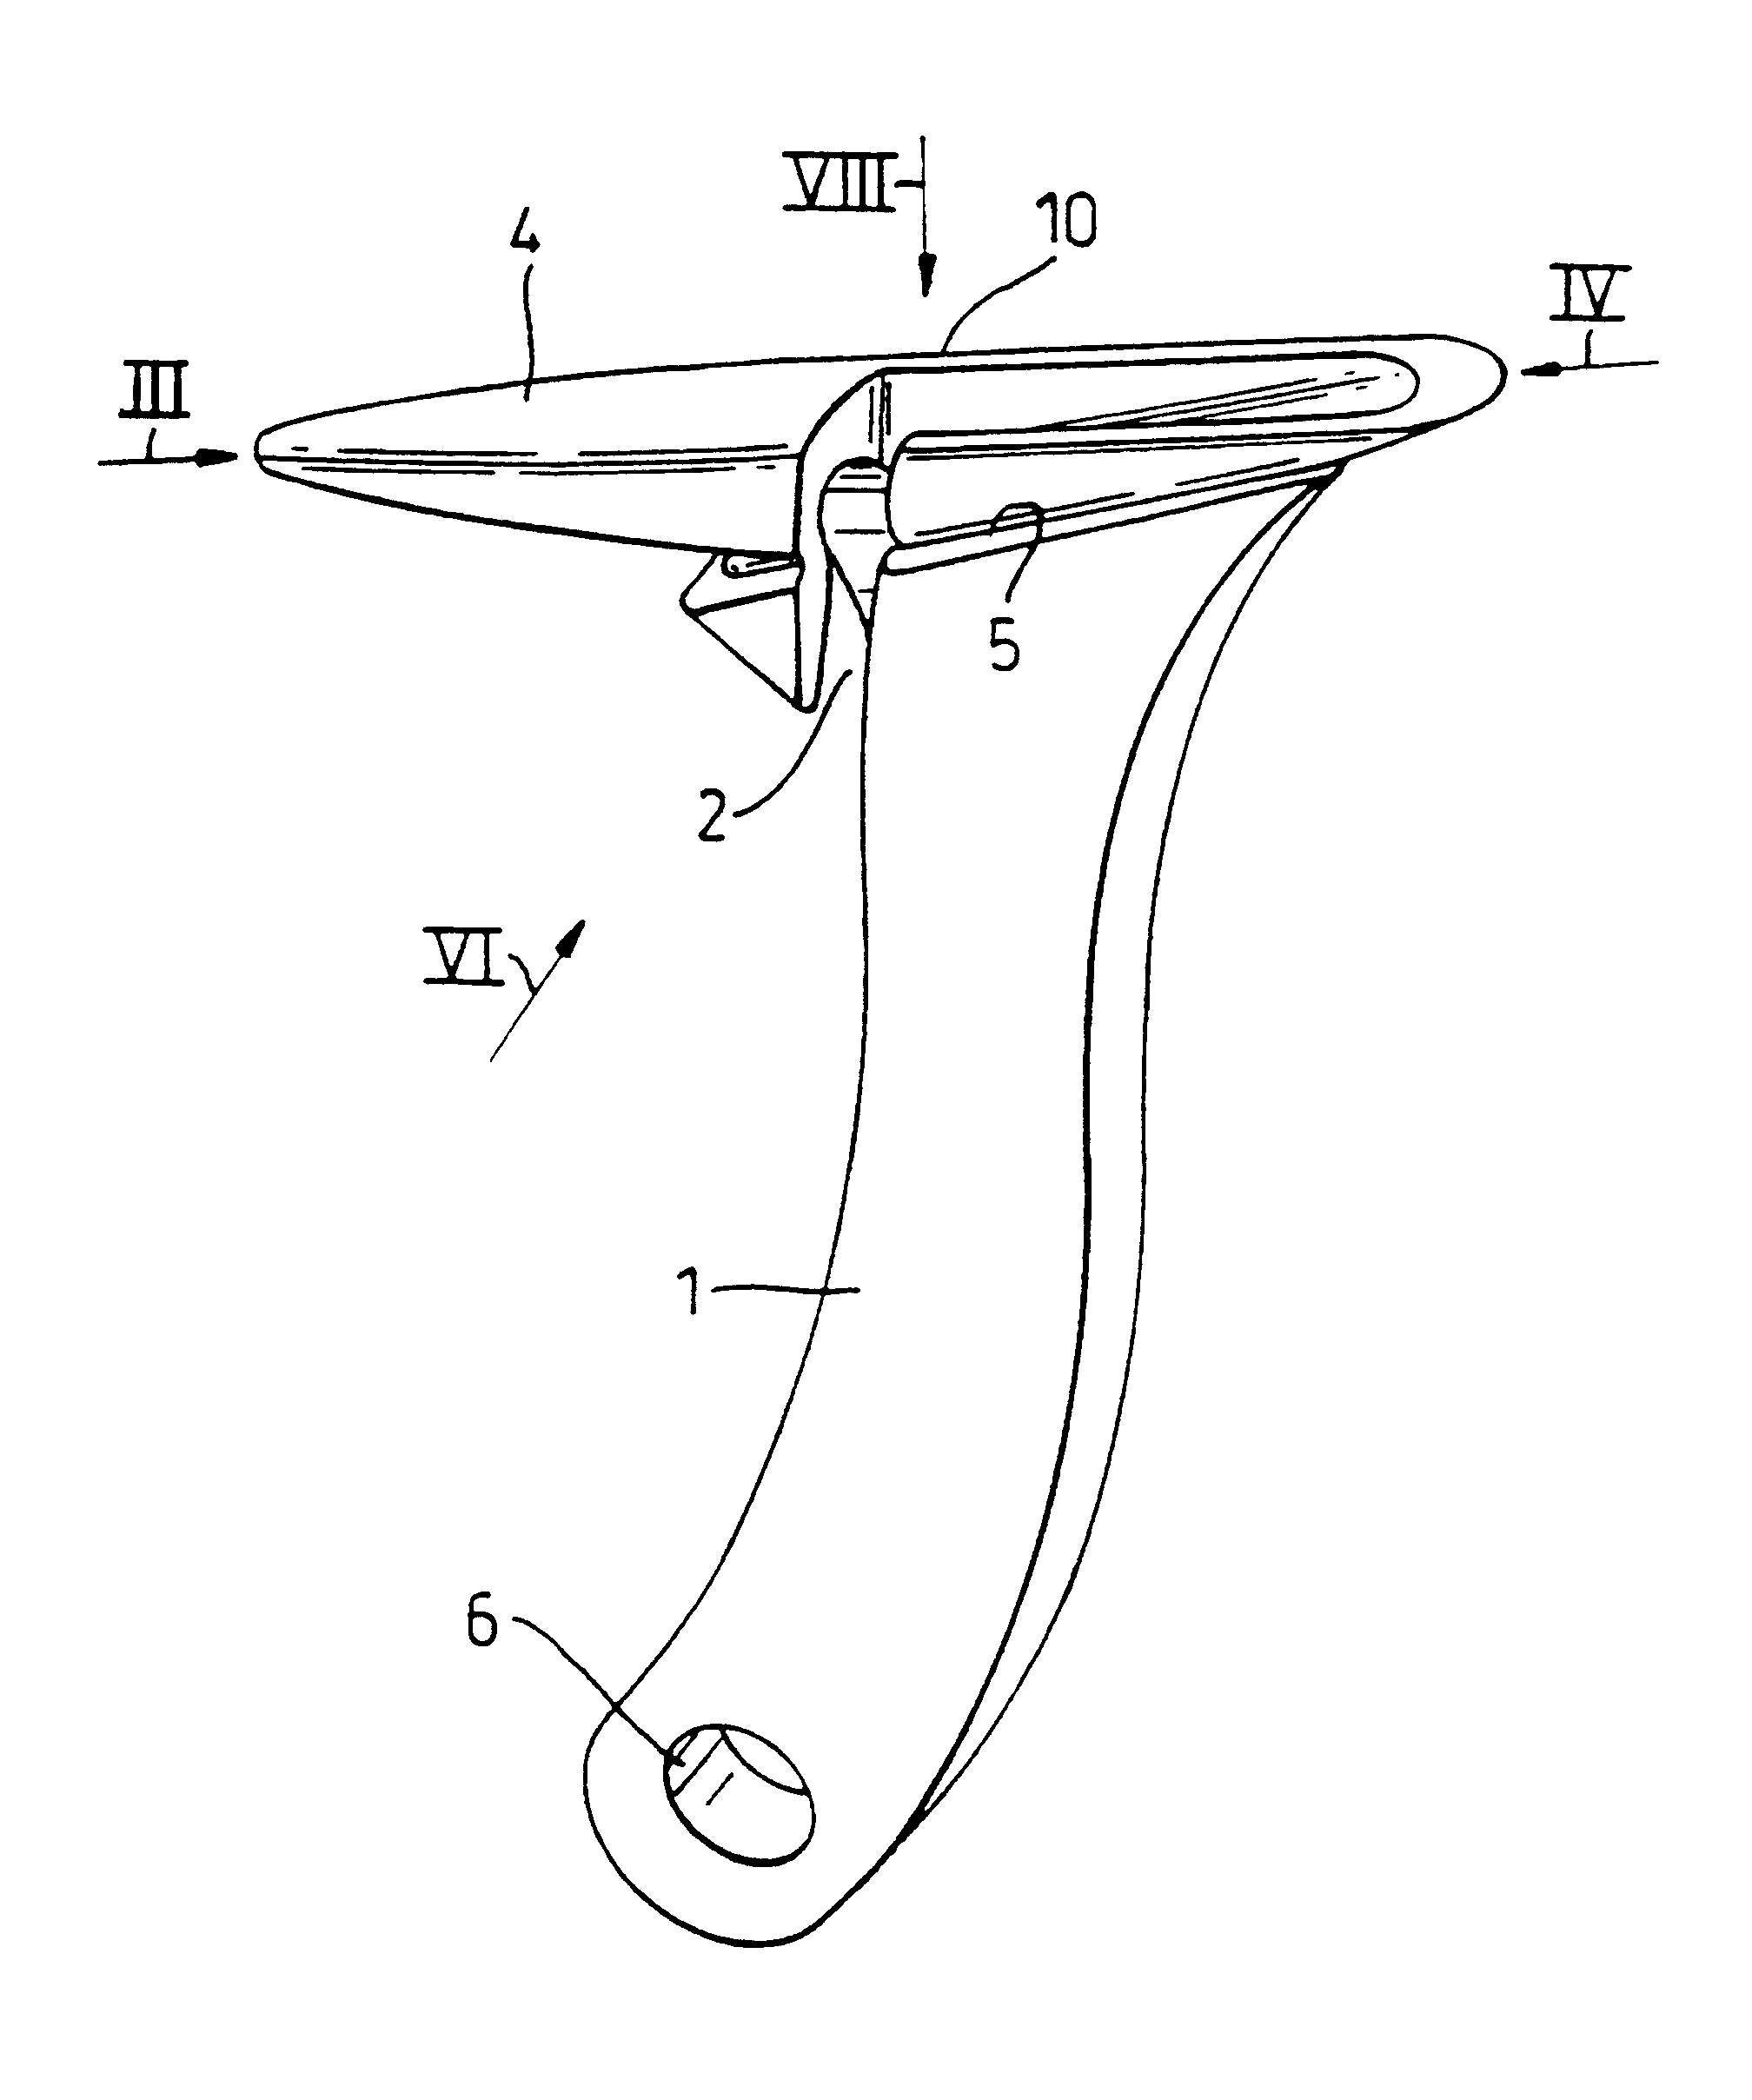 Tool and method for sheathing of cables